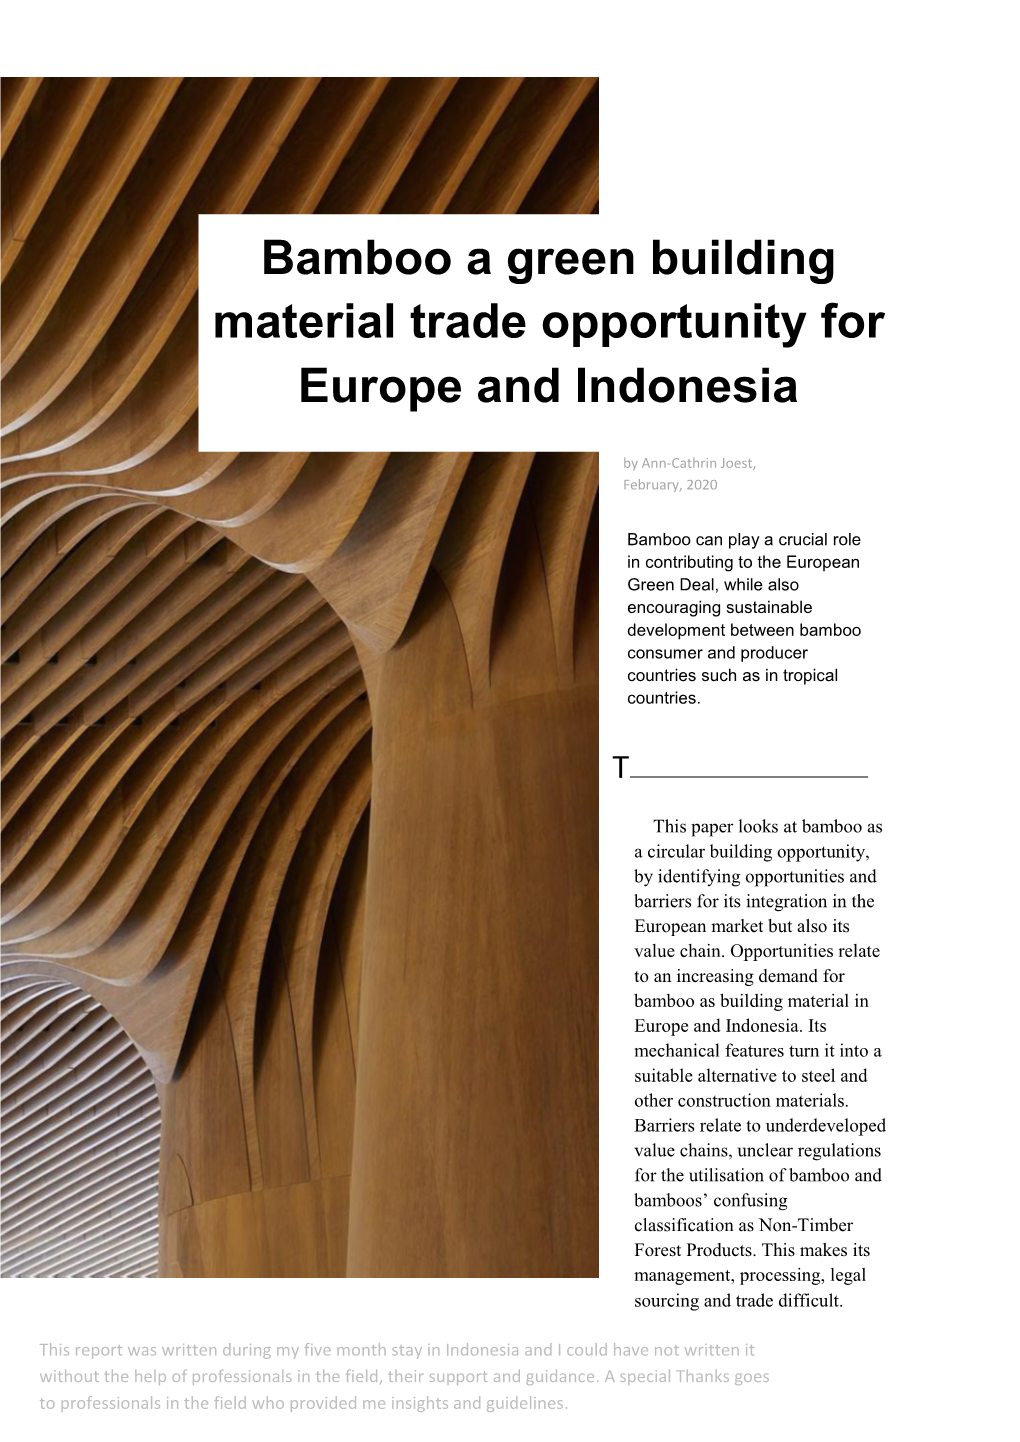 Bamboo a Green Building Material Trade Opportunity for Europe And